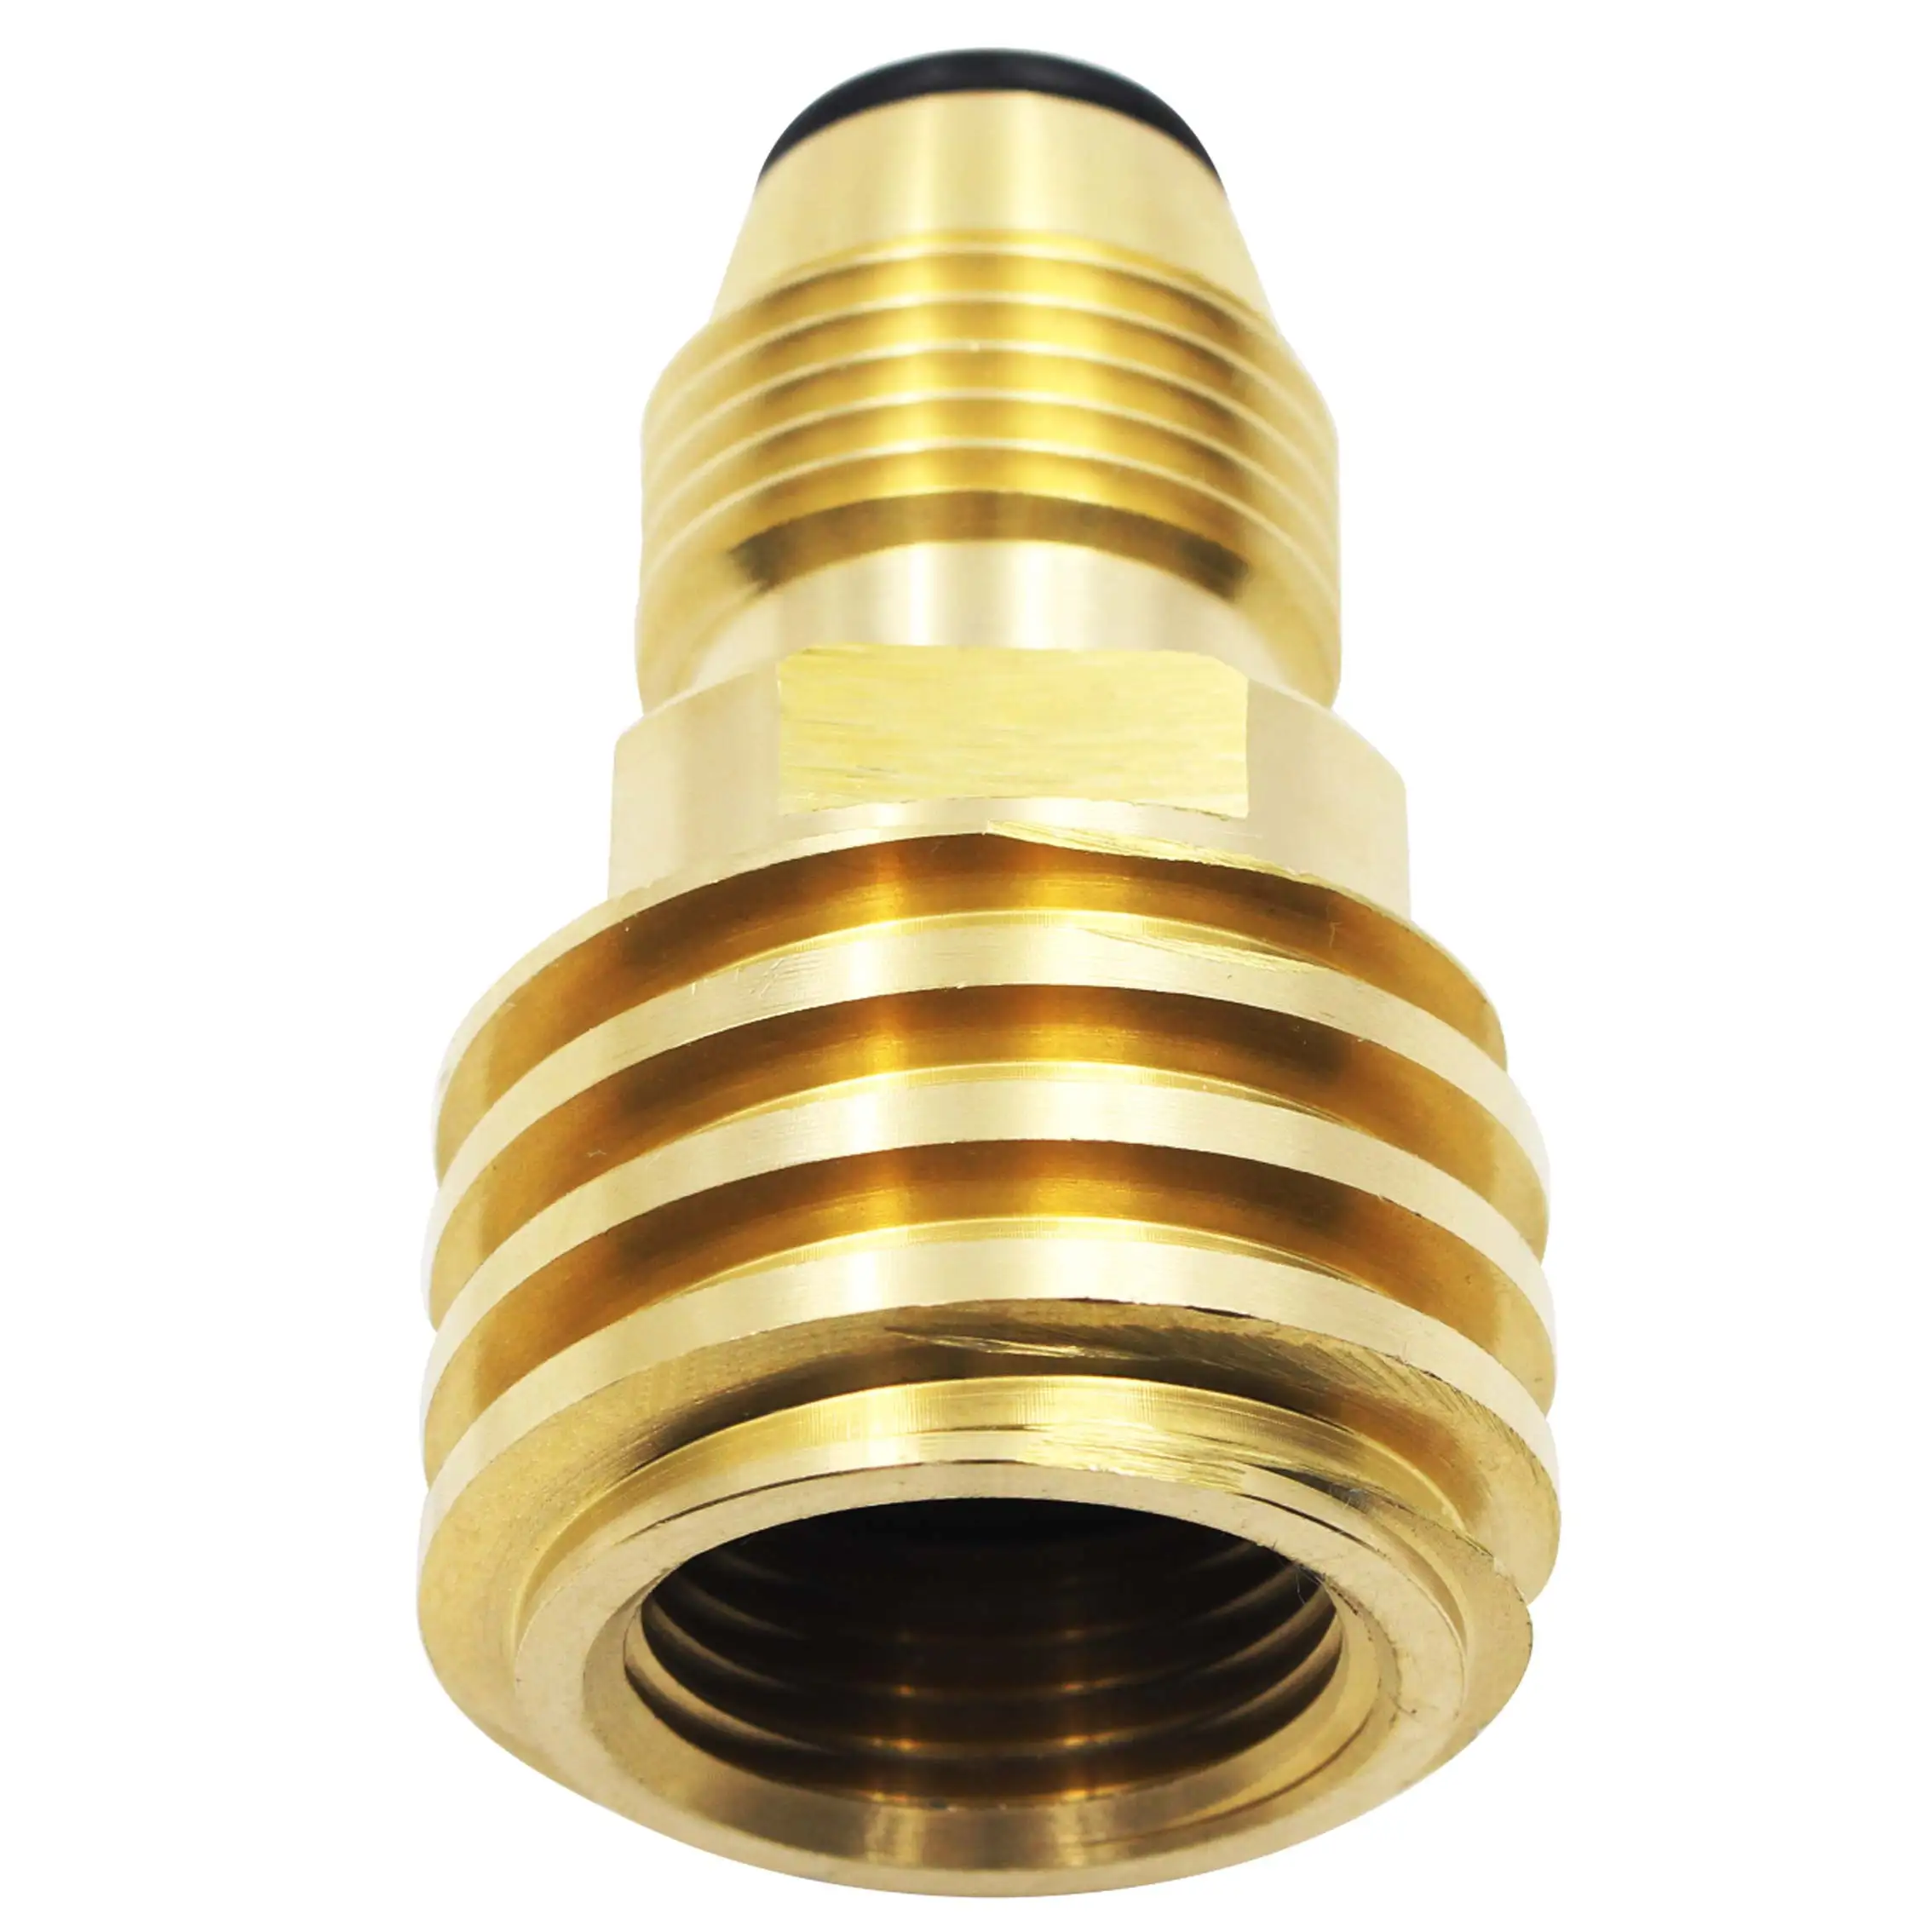 Converts Propane LP TANK POL Service Valve to QCC Outlet Brass Refill Adapter 